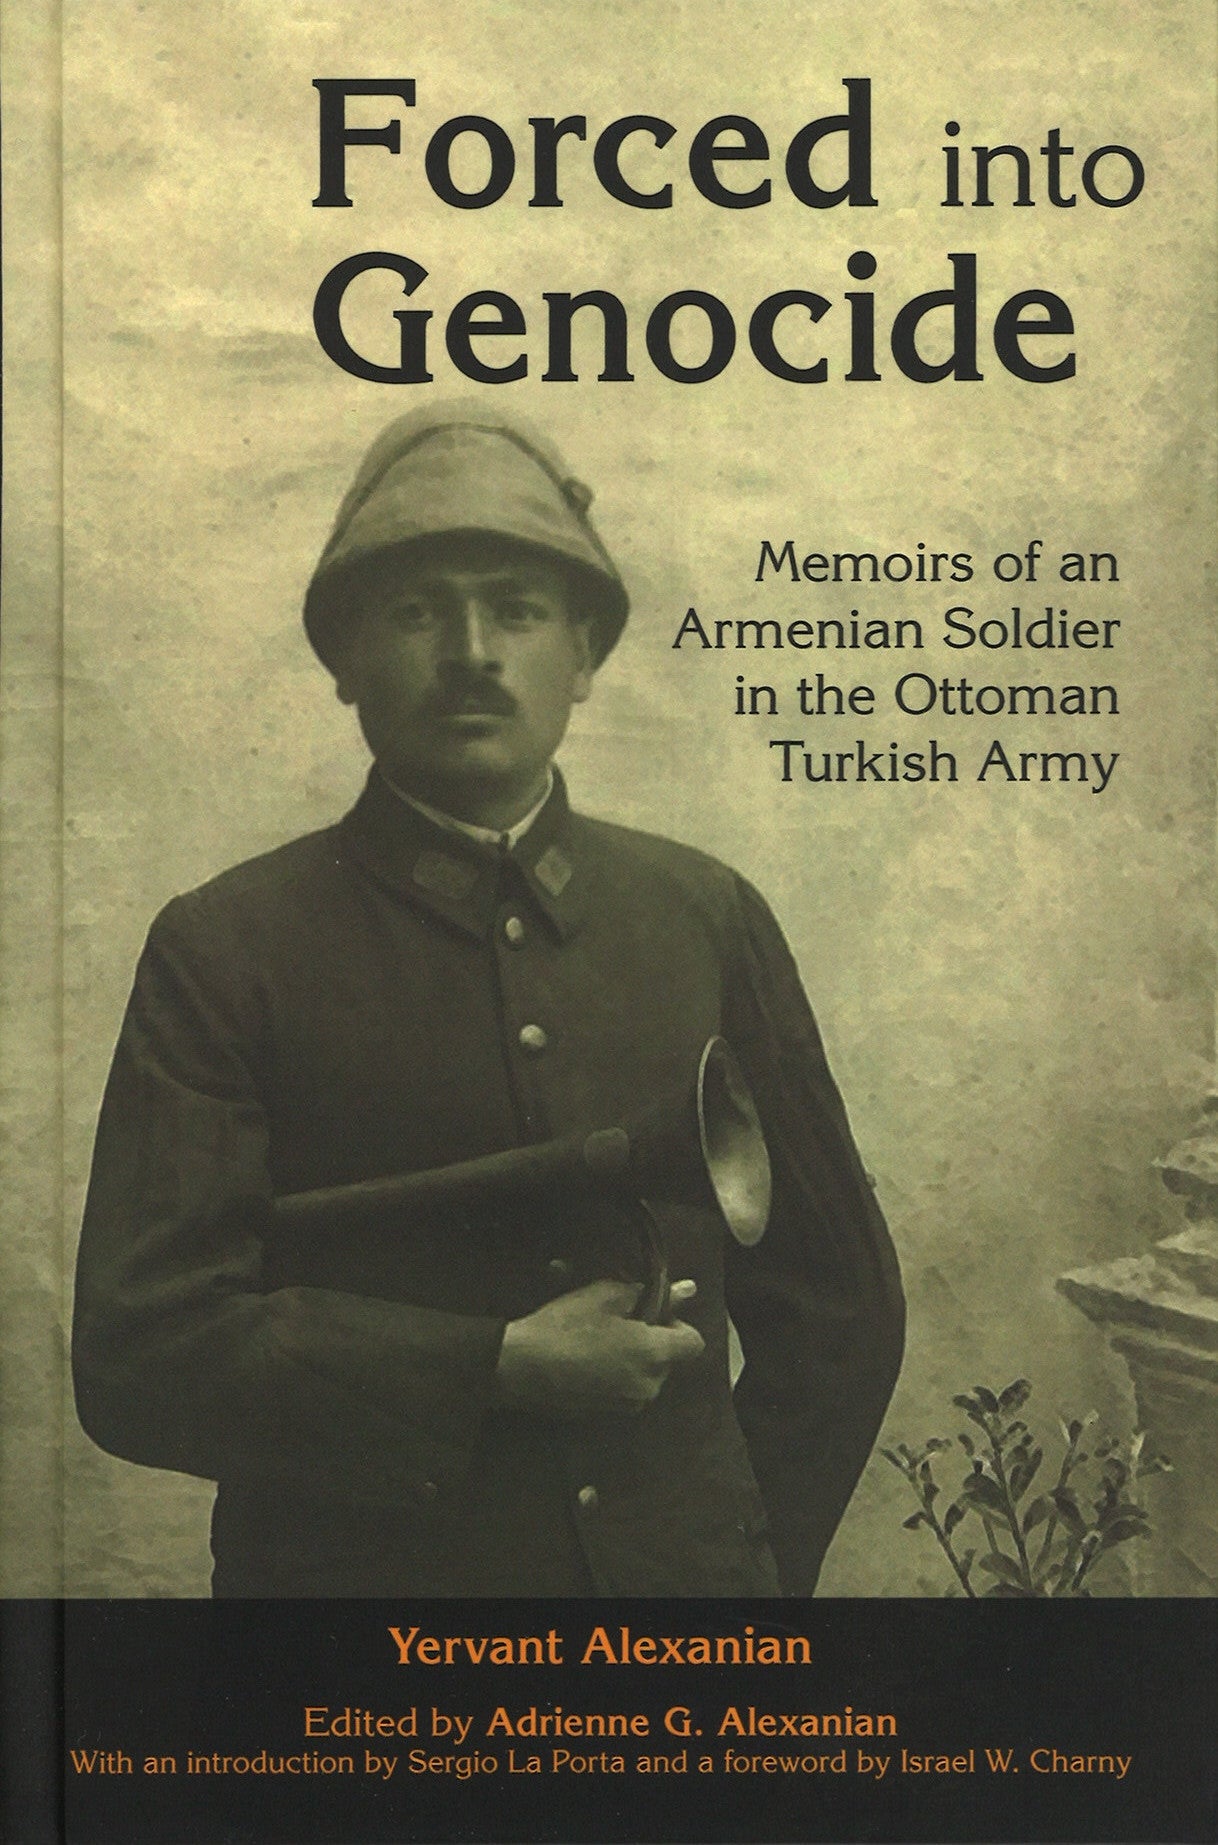 FORCED INTO GENOCIDE: Memoirs of an Armenian Soldier in the Ottoman Turkish Army